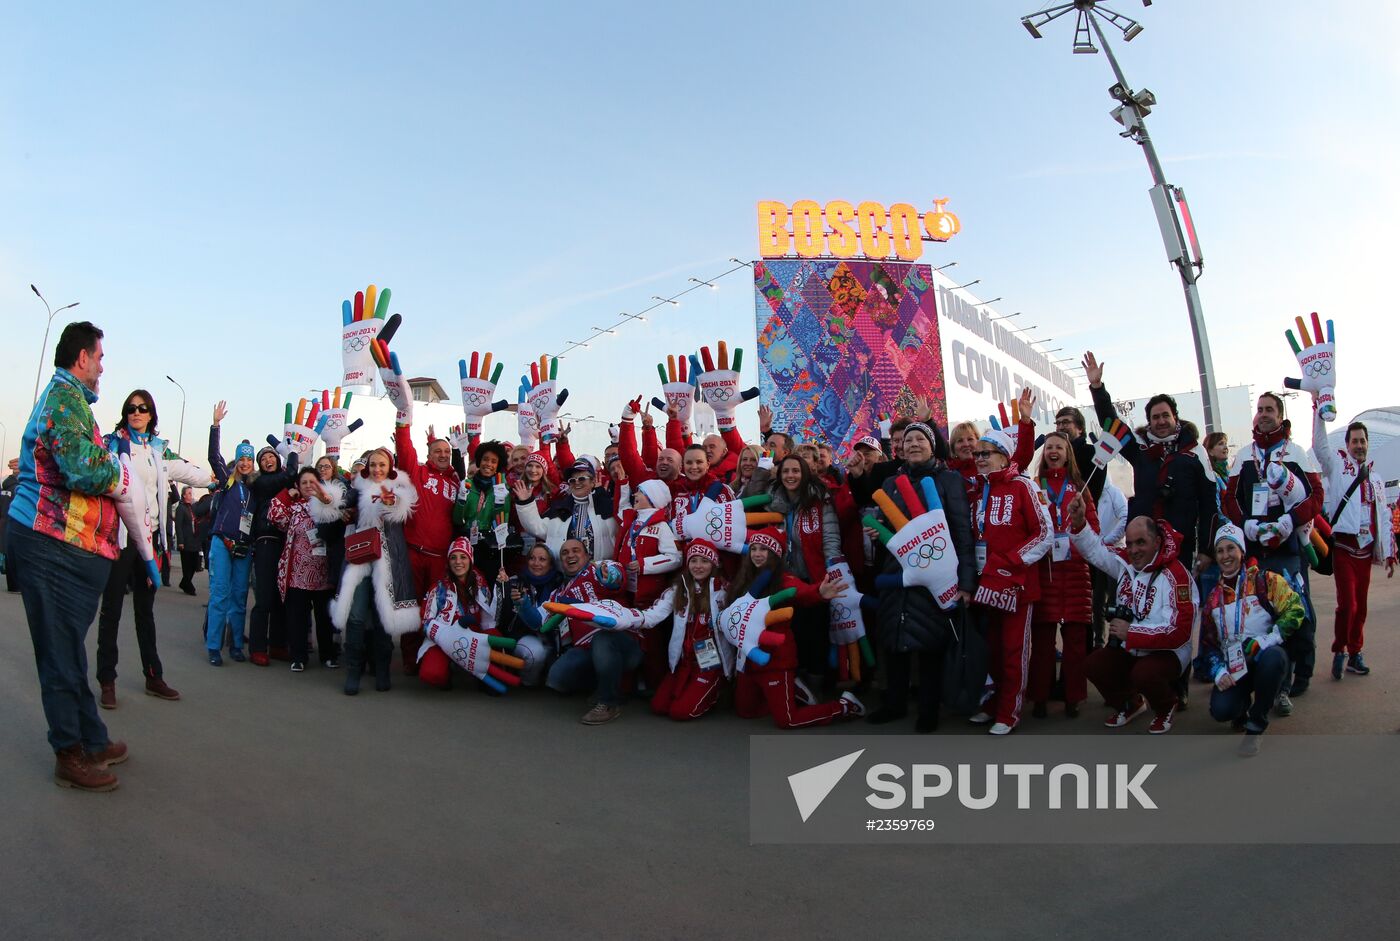 Spectators arrive at the opening ceremony of the 2014 Winter Olympics